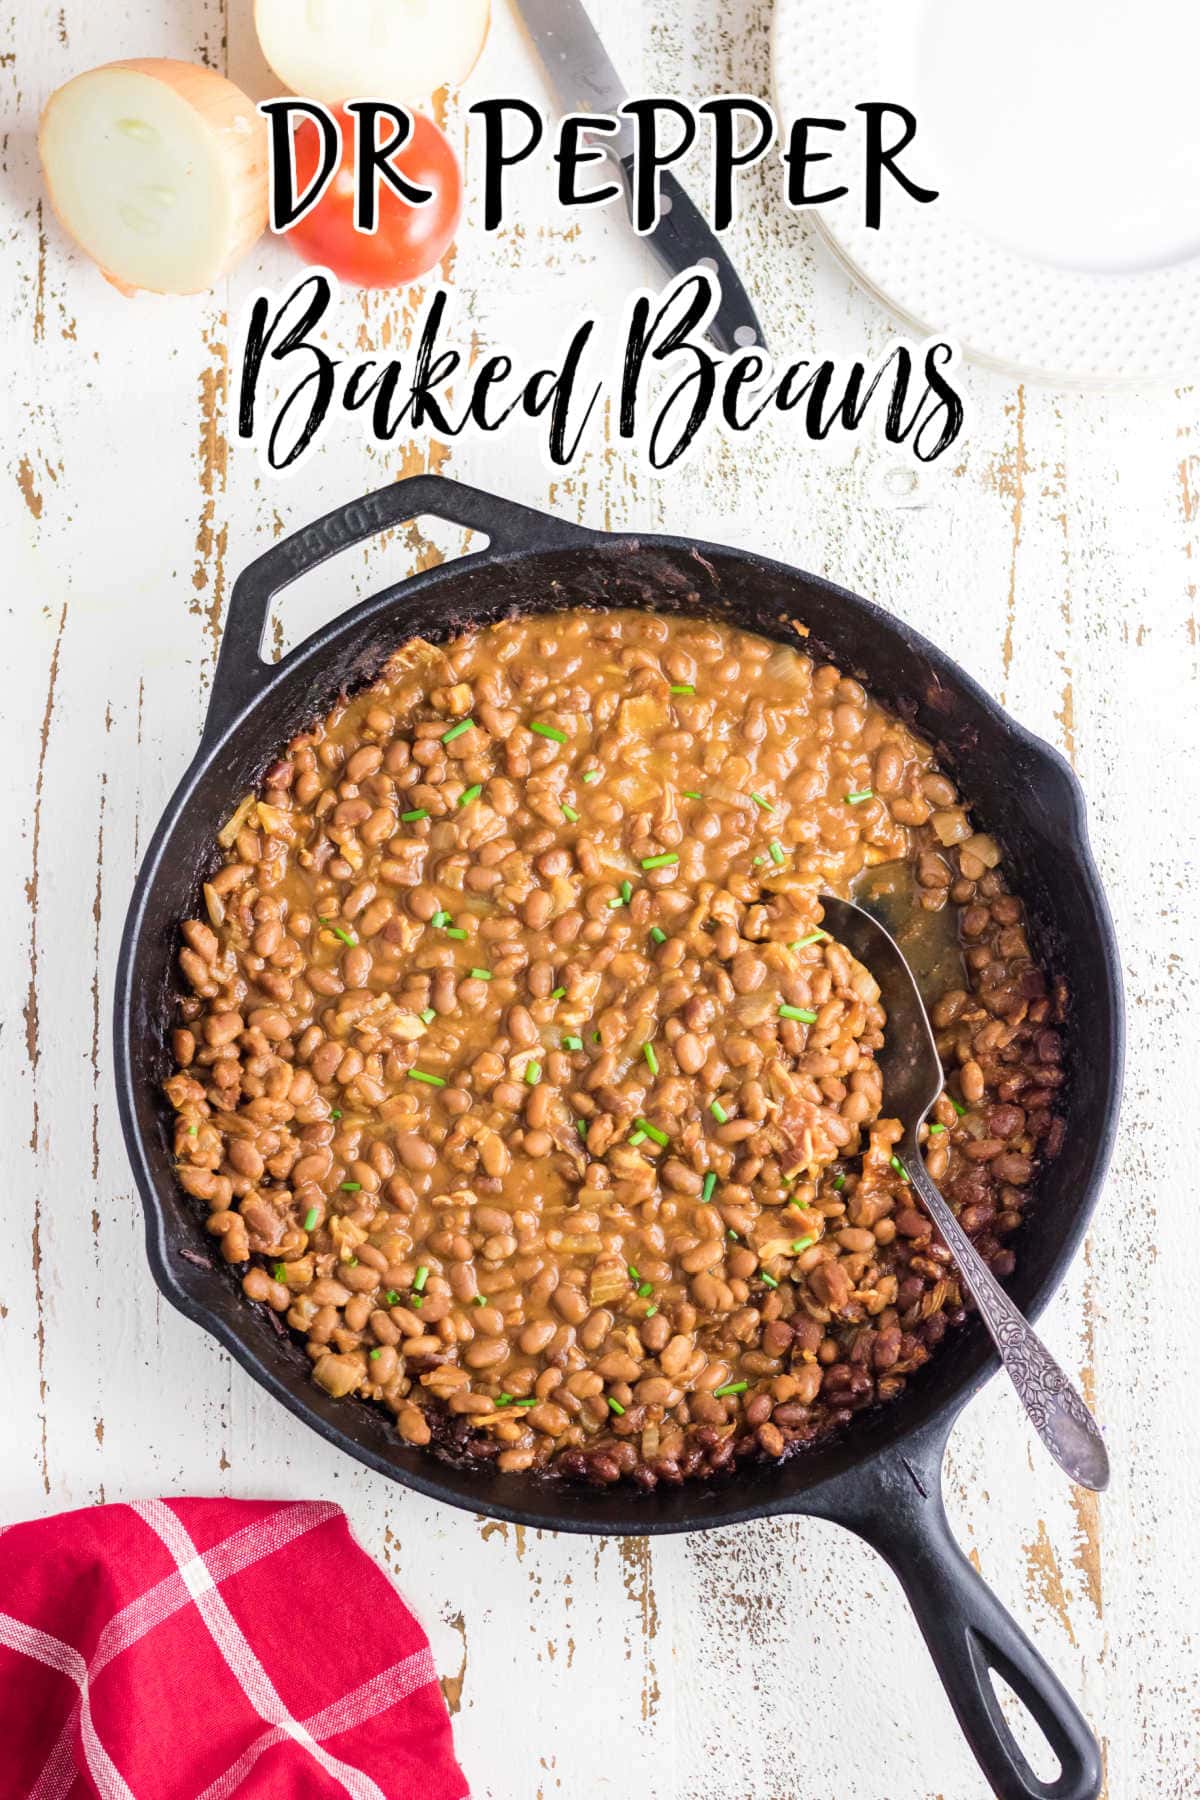 Overhead view of baked beans in an iron skillet with title text overlay.